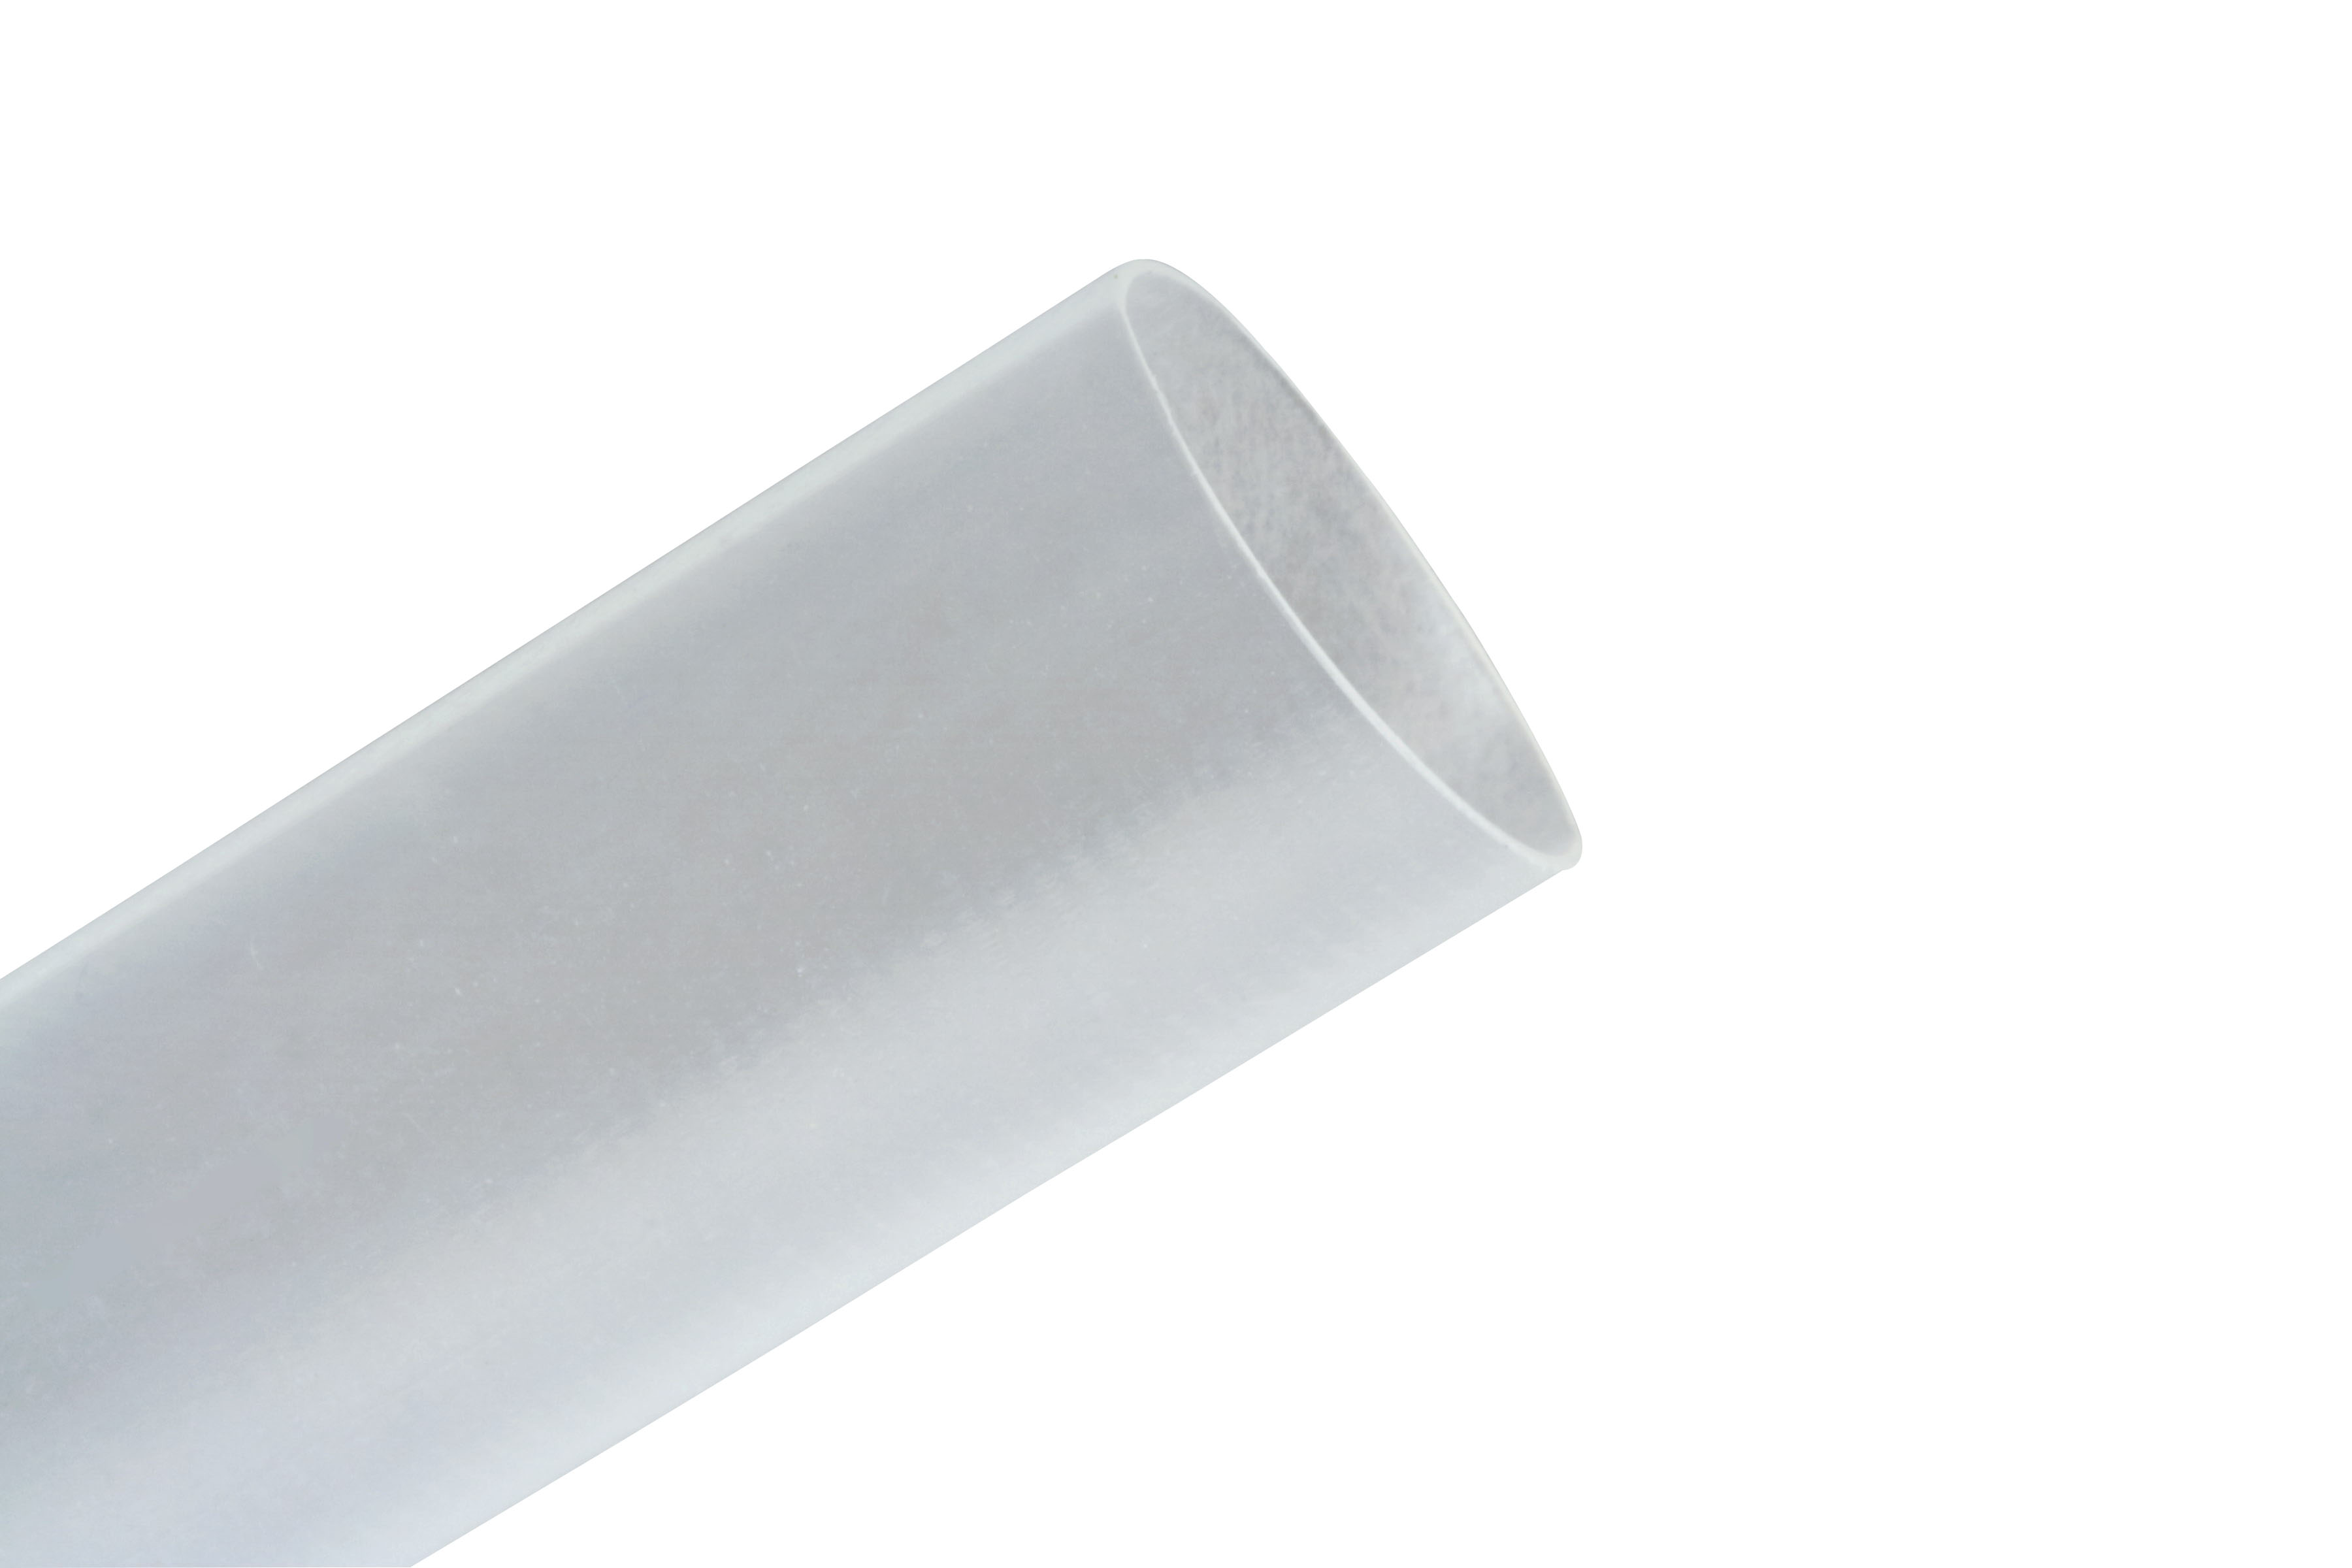 Tube End Cap Plastic Chair Feet 10 Pack Round Tube Insert 47.6mm 1mm-3mm Wall 